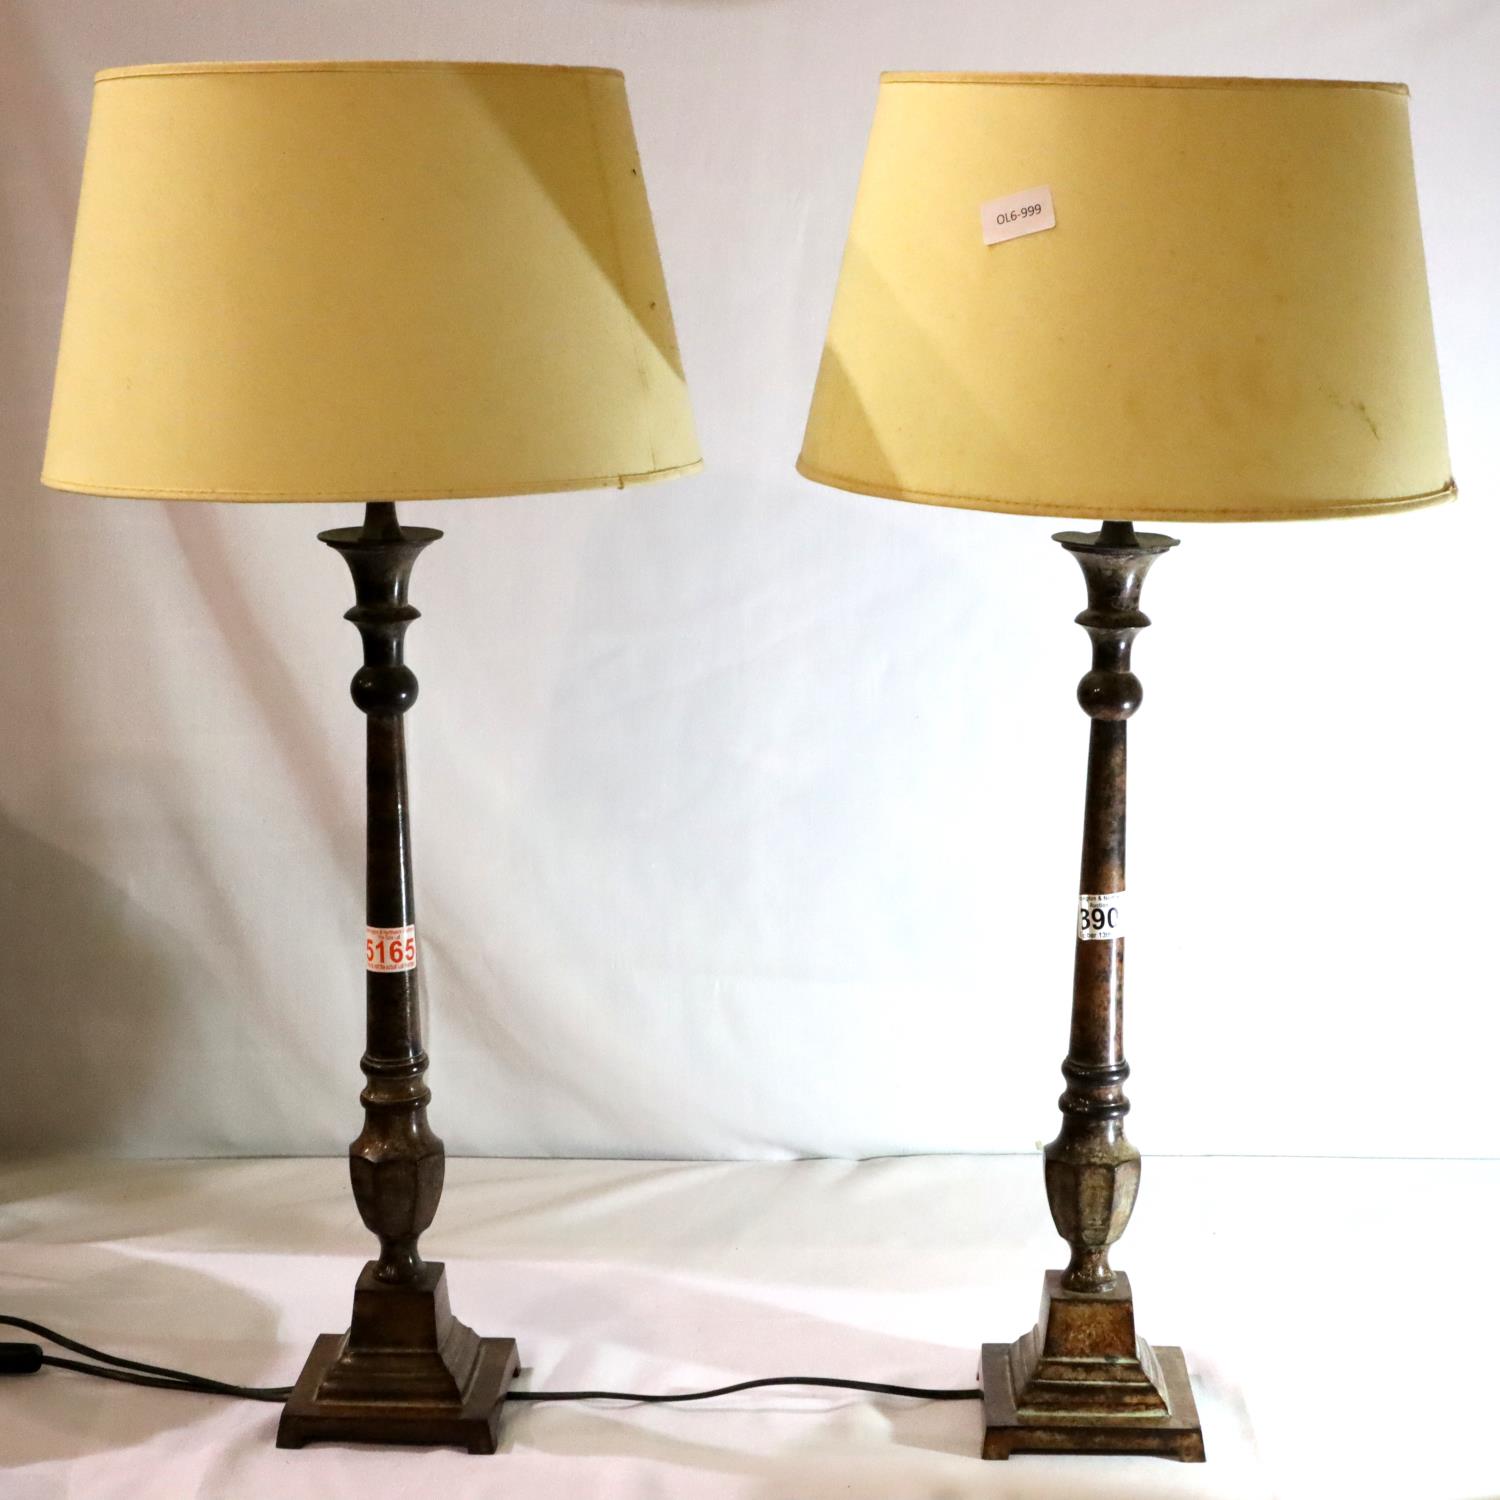 Pair of cast metal table lamps of monumental form with cream shades, overall H:75 cm. Not